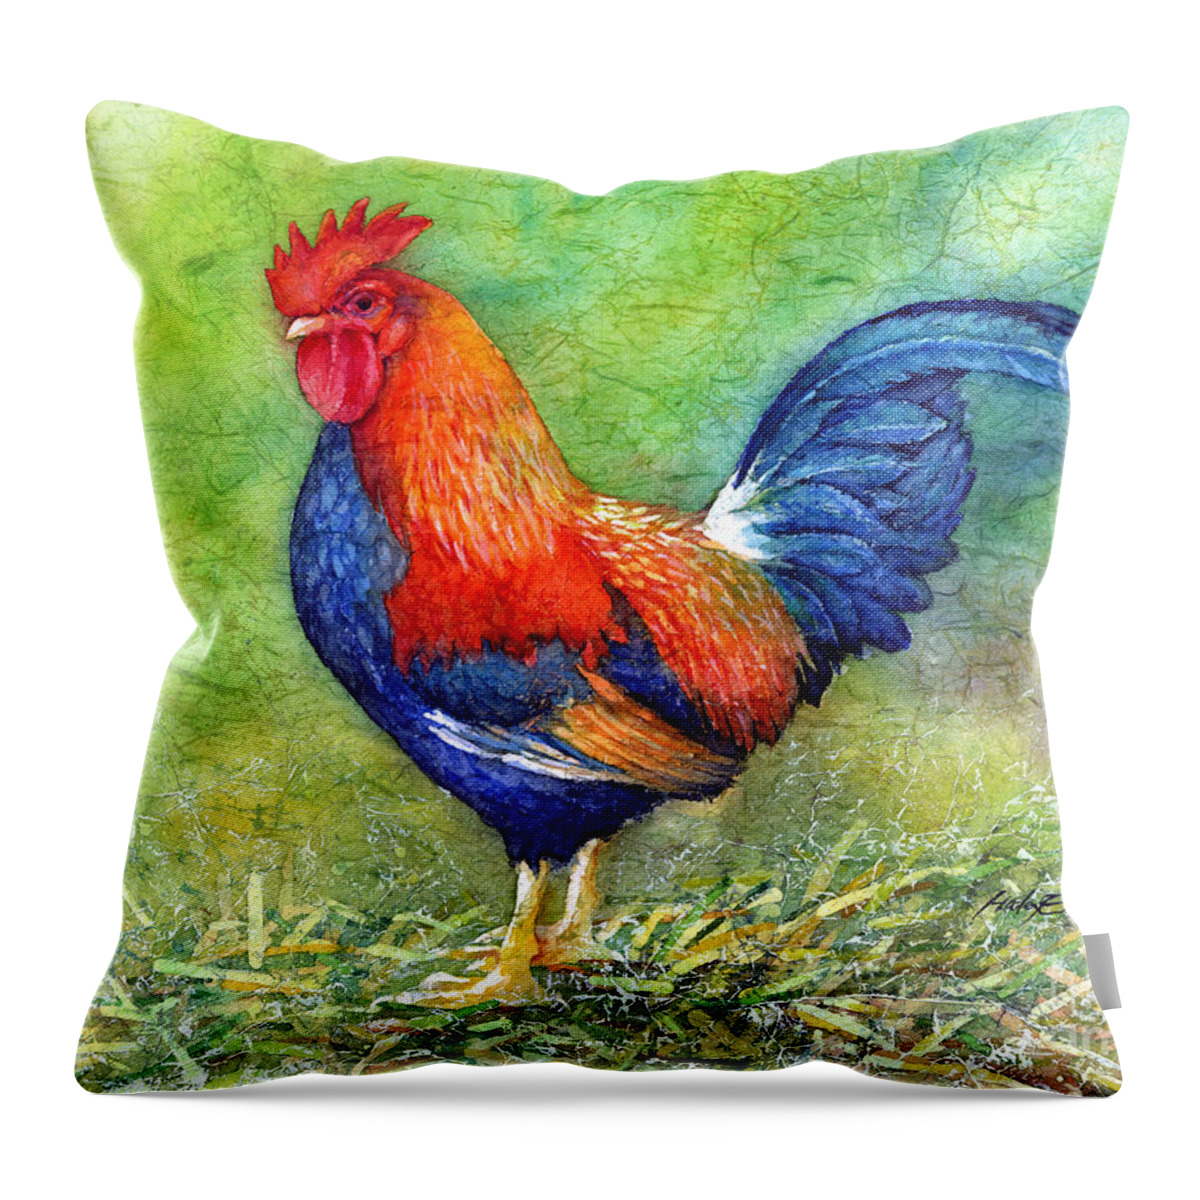 Rooster Throw Pillow featuring the painting Rooster by Hailey E Herrera